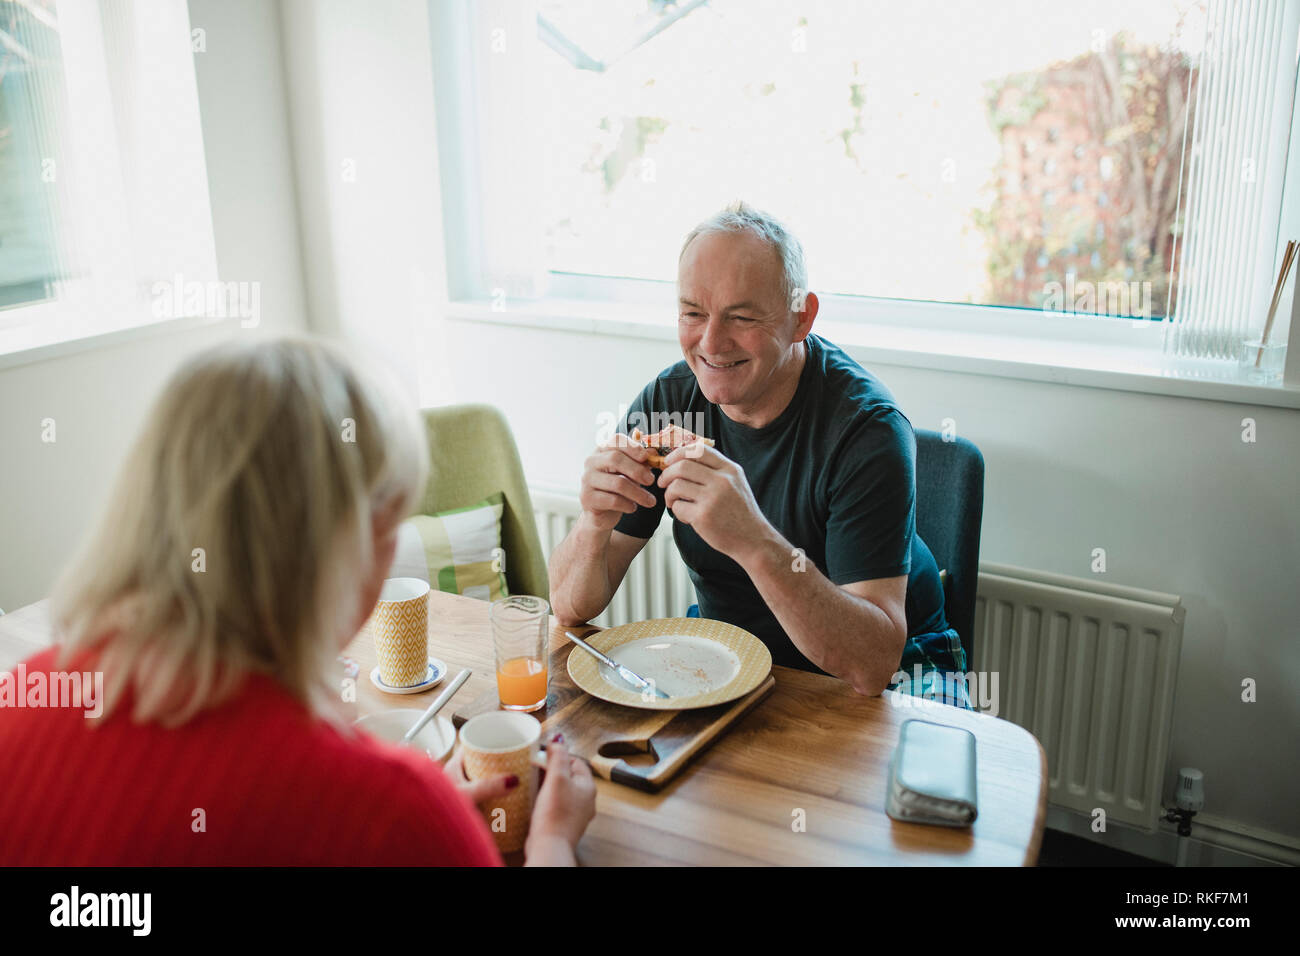 Senior man is laughing and talking with his partner while they enjoy breakfast together at home. Stock Photo